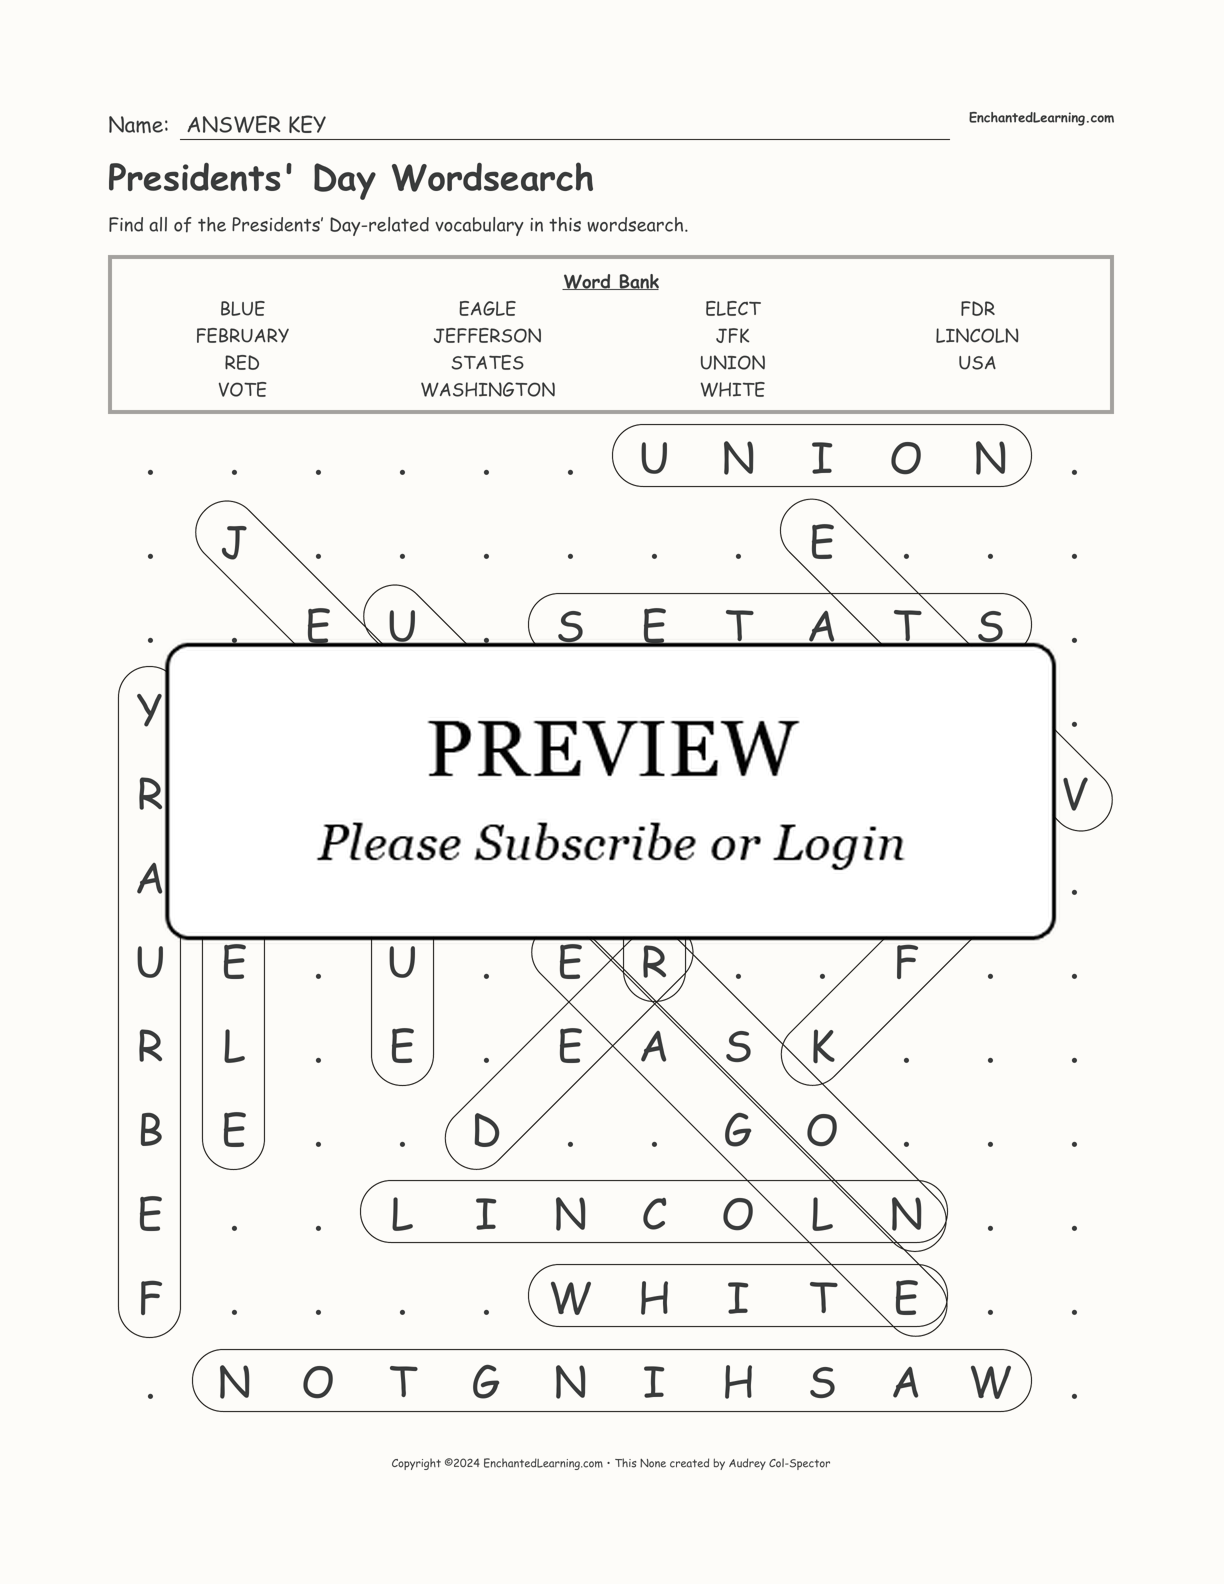 Presidents' Day Wordsearch interactive worksheet page 2